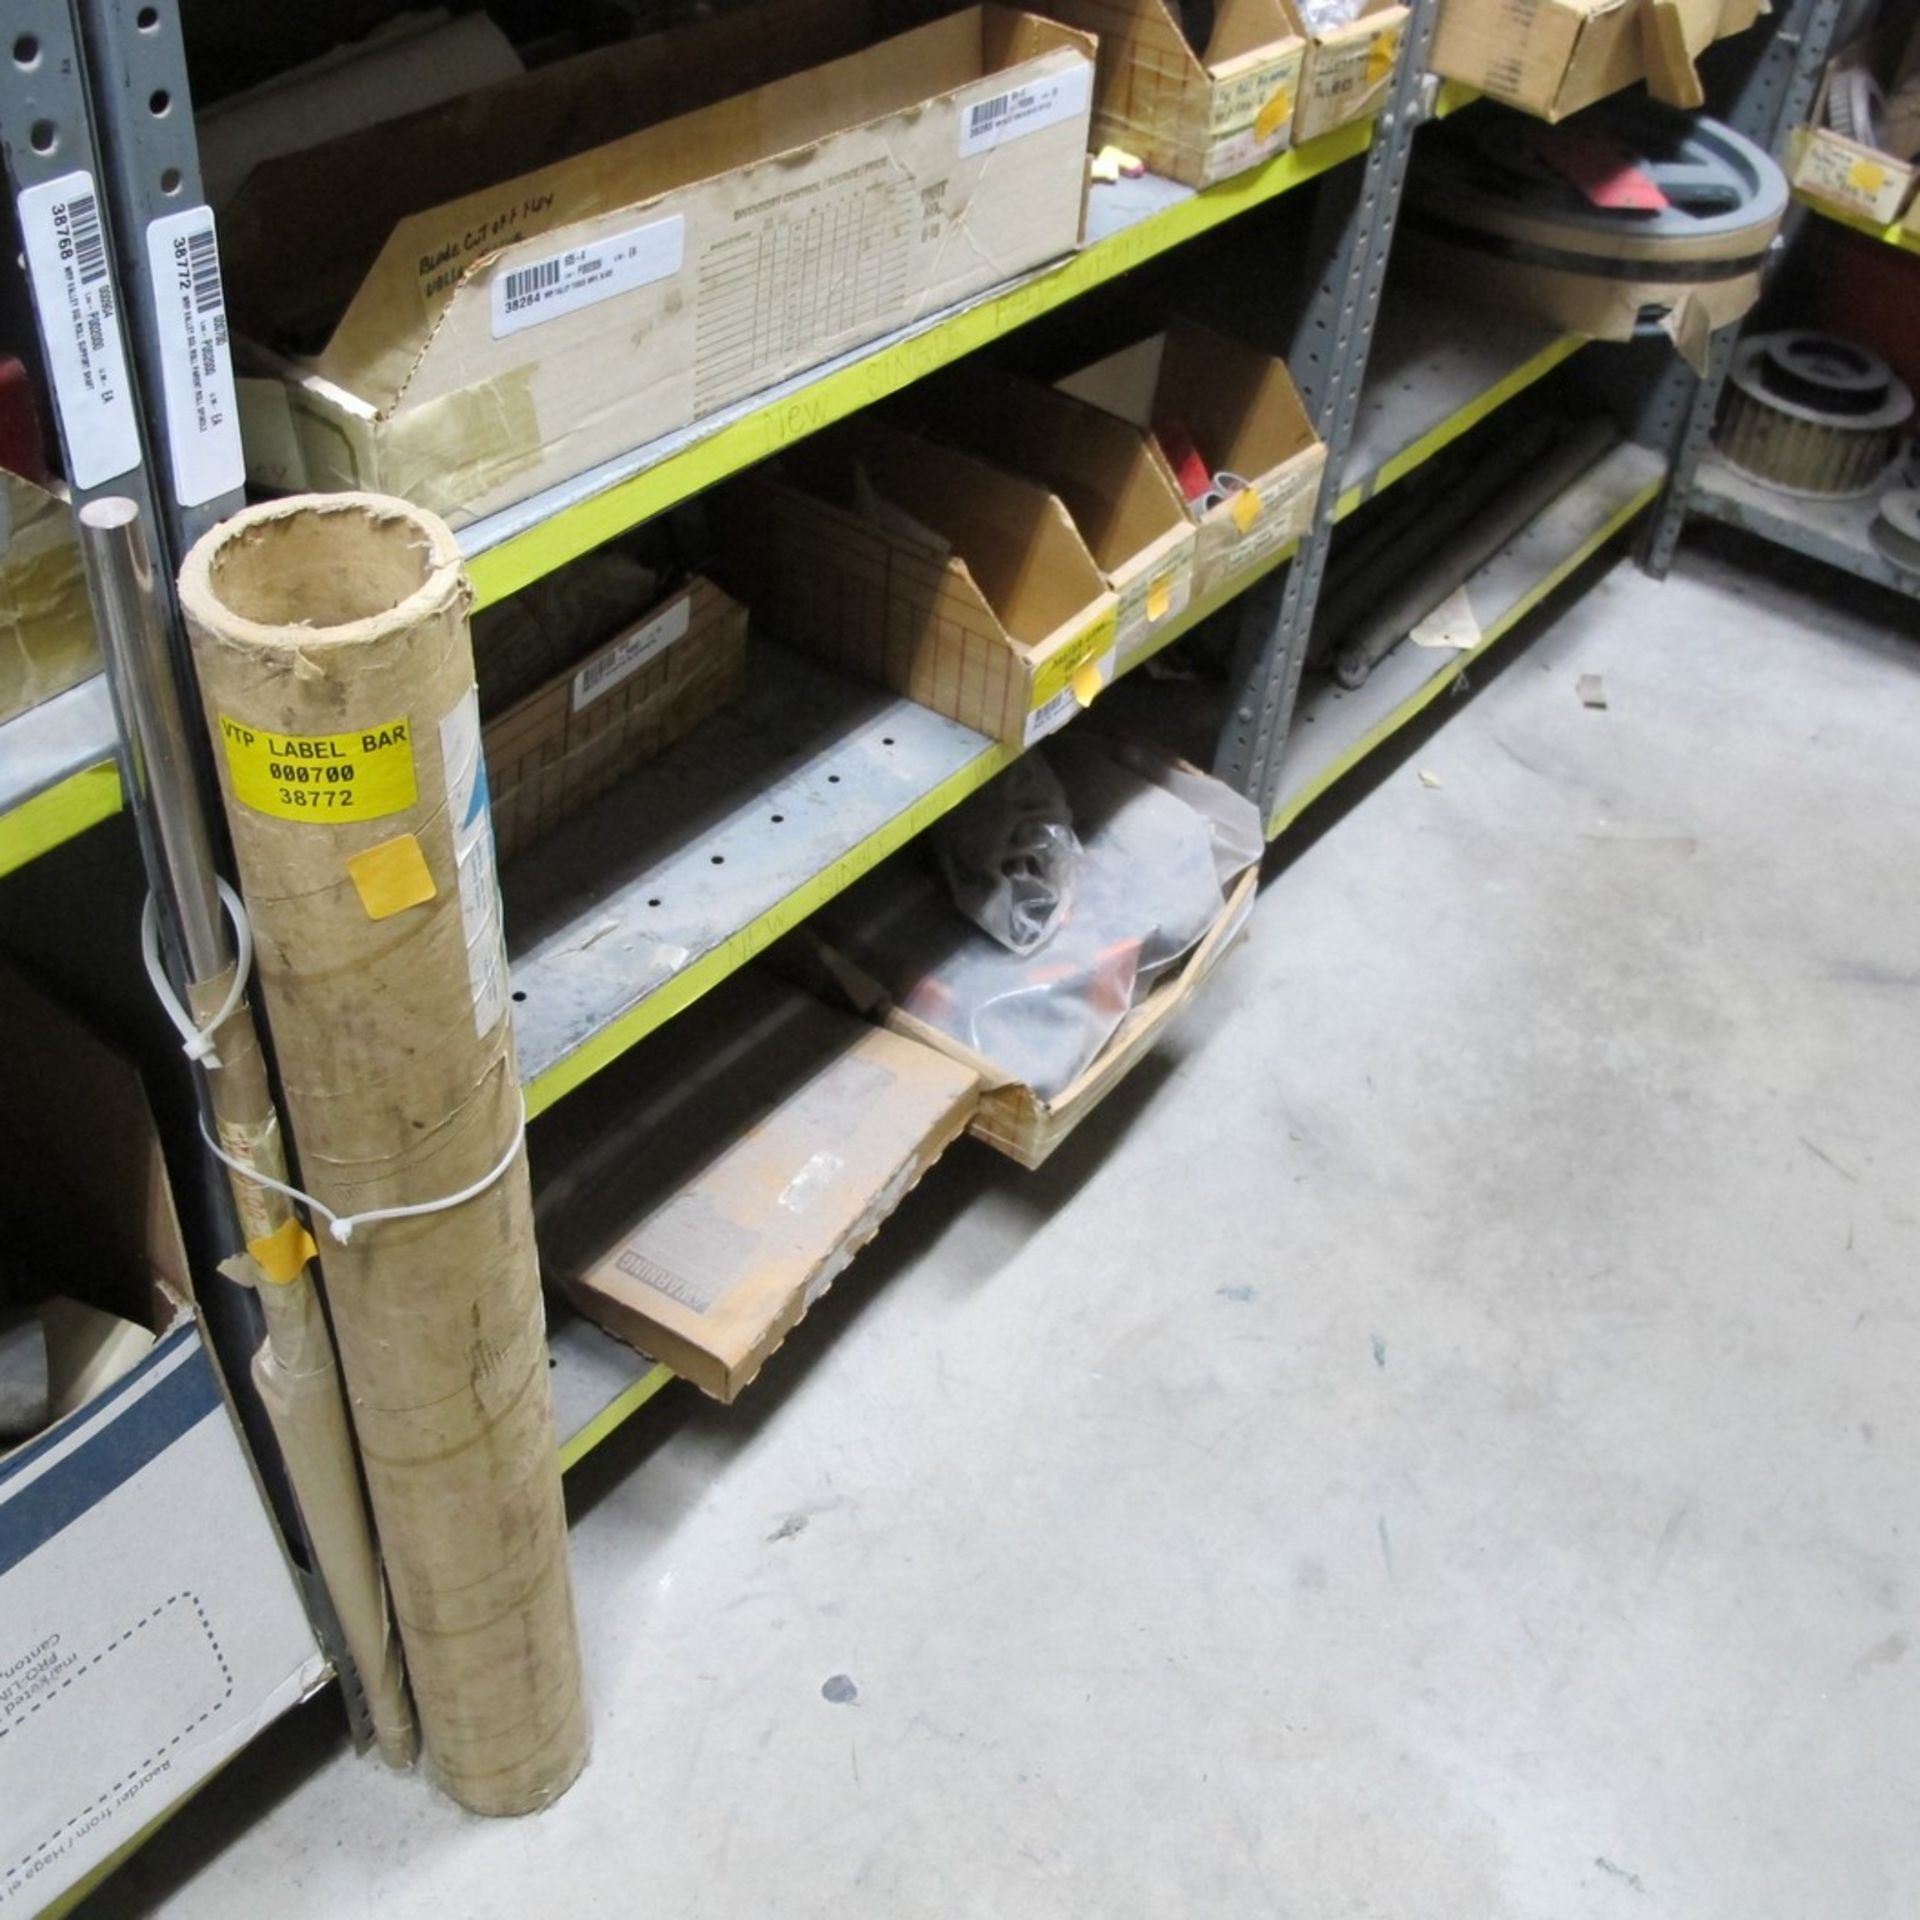 LOT OF ASST. PULLIES, TIMING BELTS, PRINTER PARTS, CLEANER, WRAPPER PARTS W/ (4) SECTIONS OF RACKING - Image 7 of 12